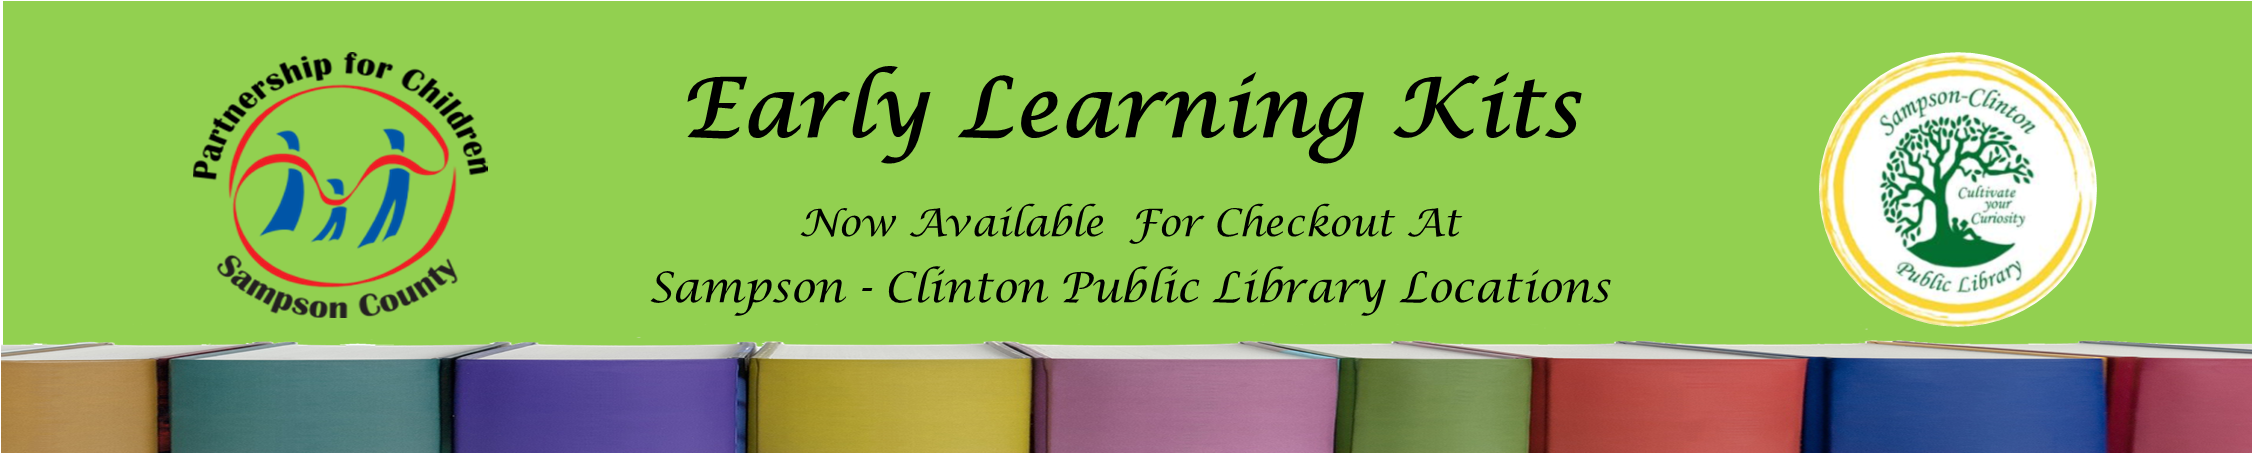 Sampson-Clinton Early Learning Kits Banner